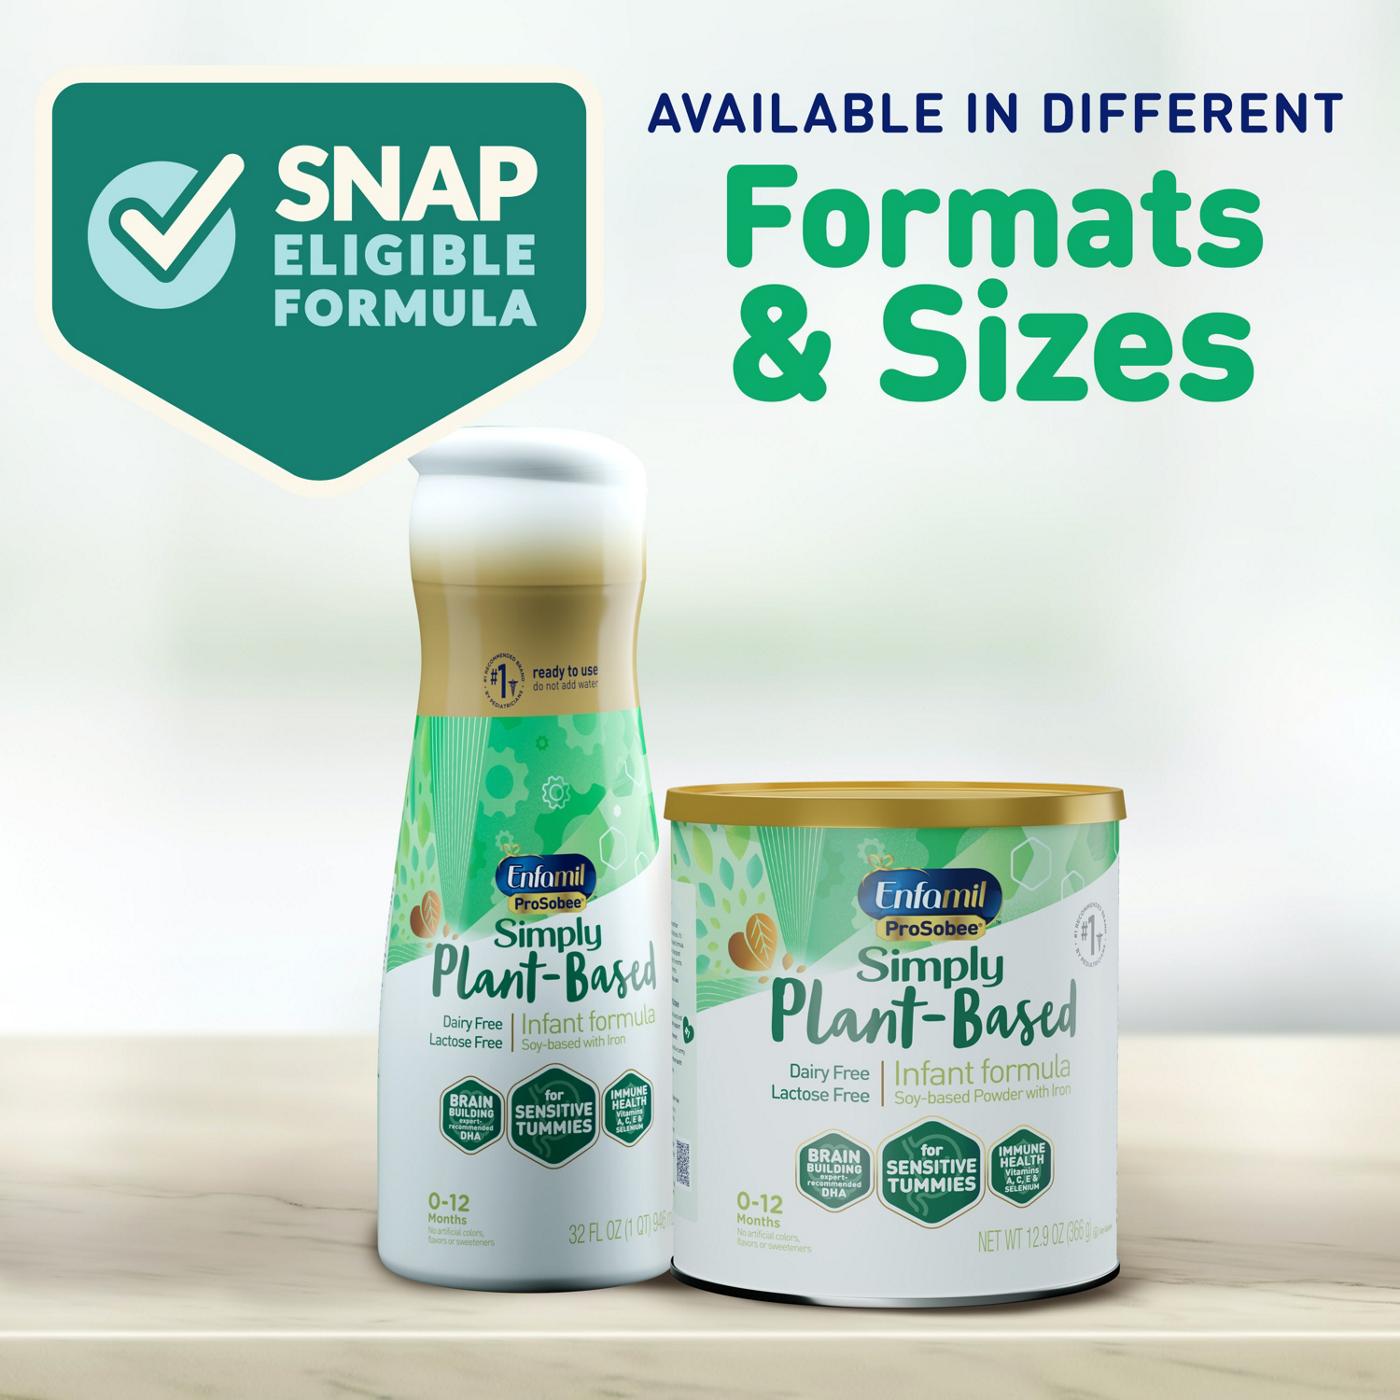 Enfamil ProSobee Simply Plant-Based Ready-to-Feed Infant Formula; image 5 of 7